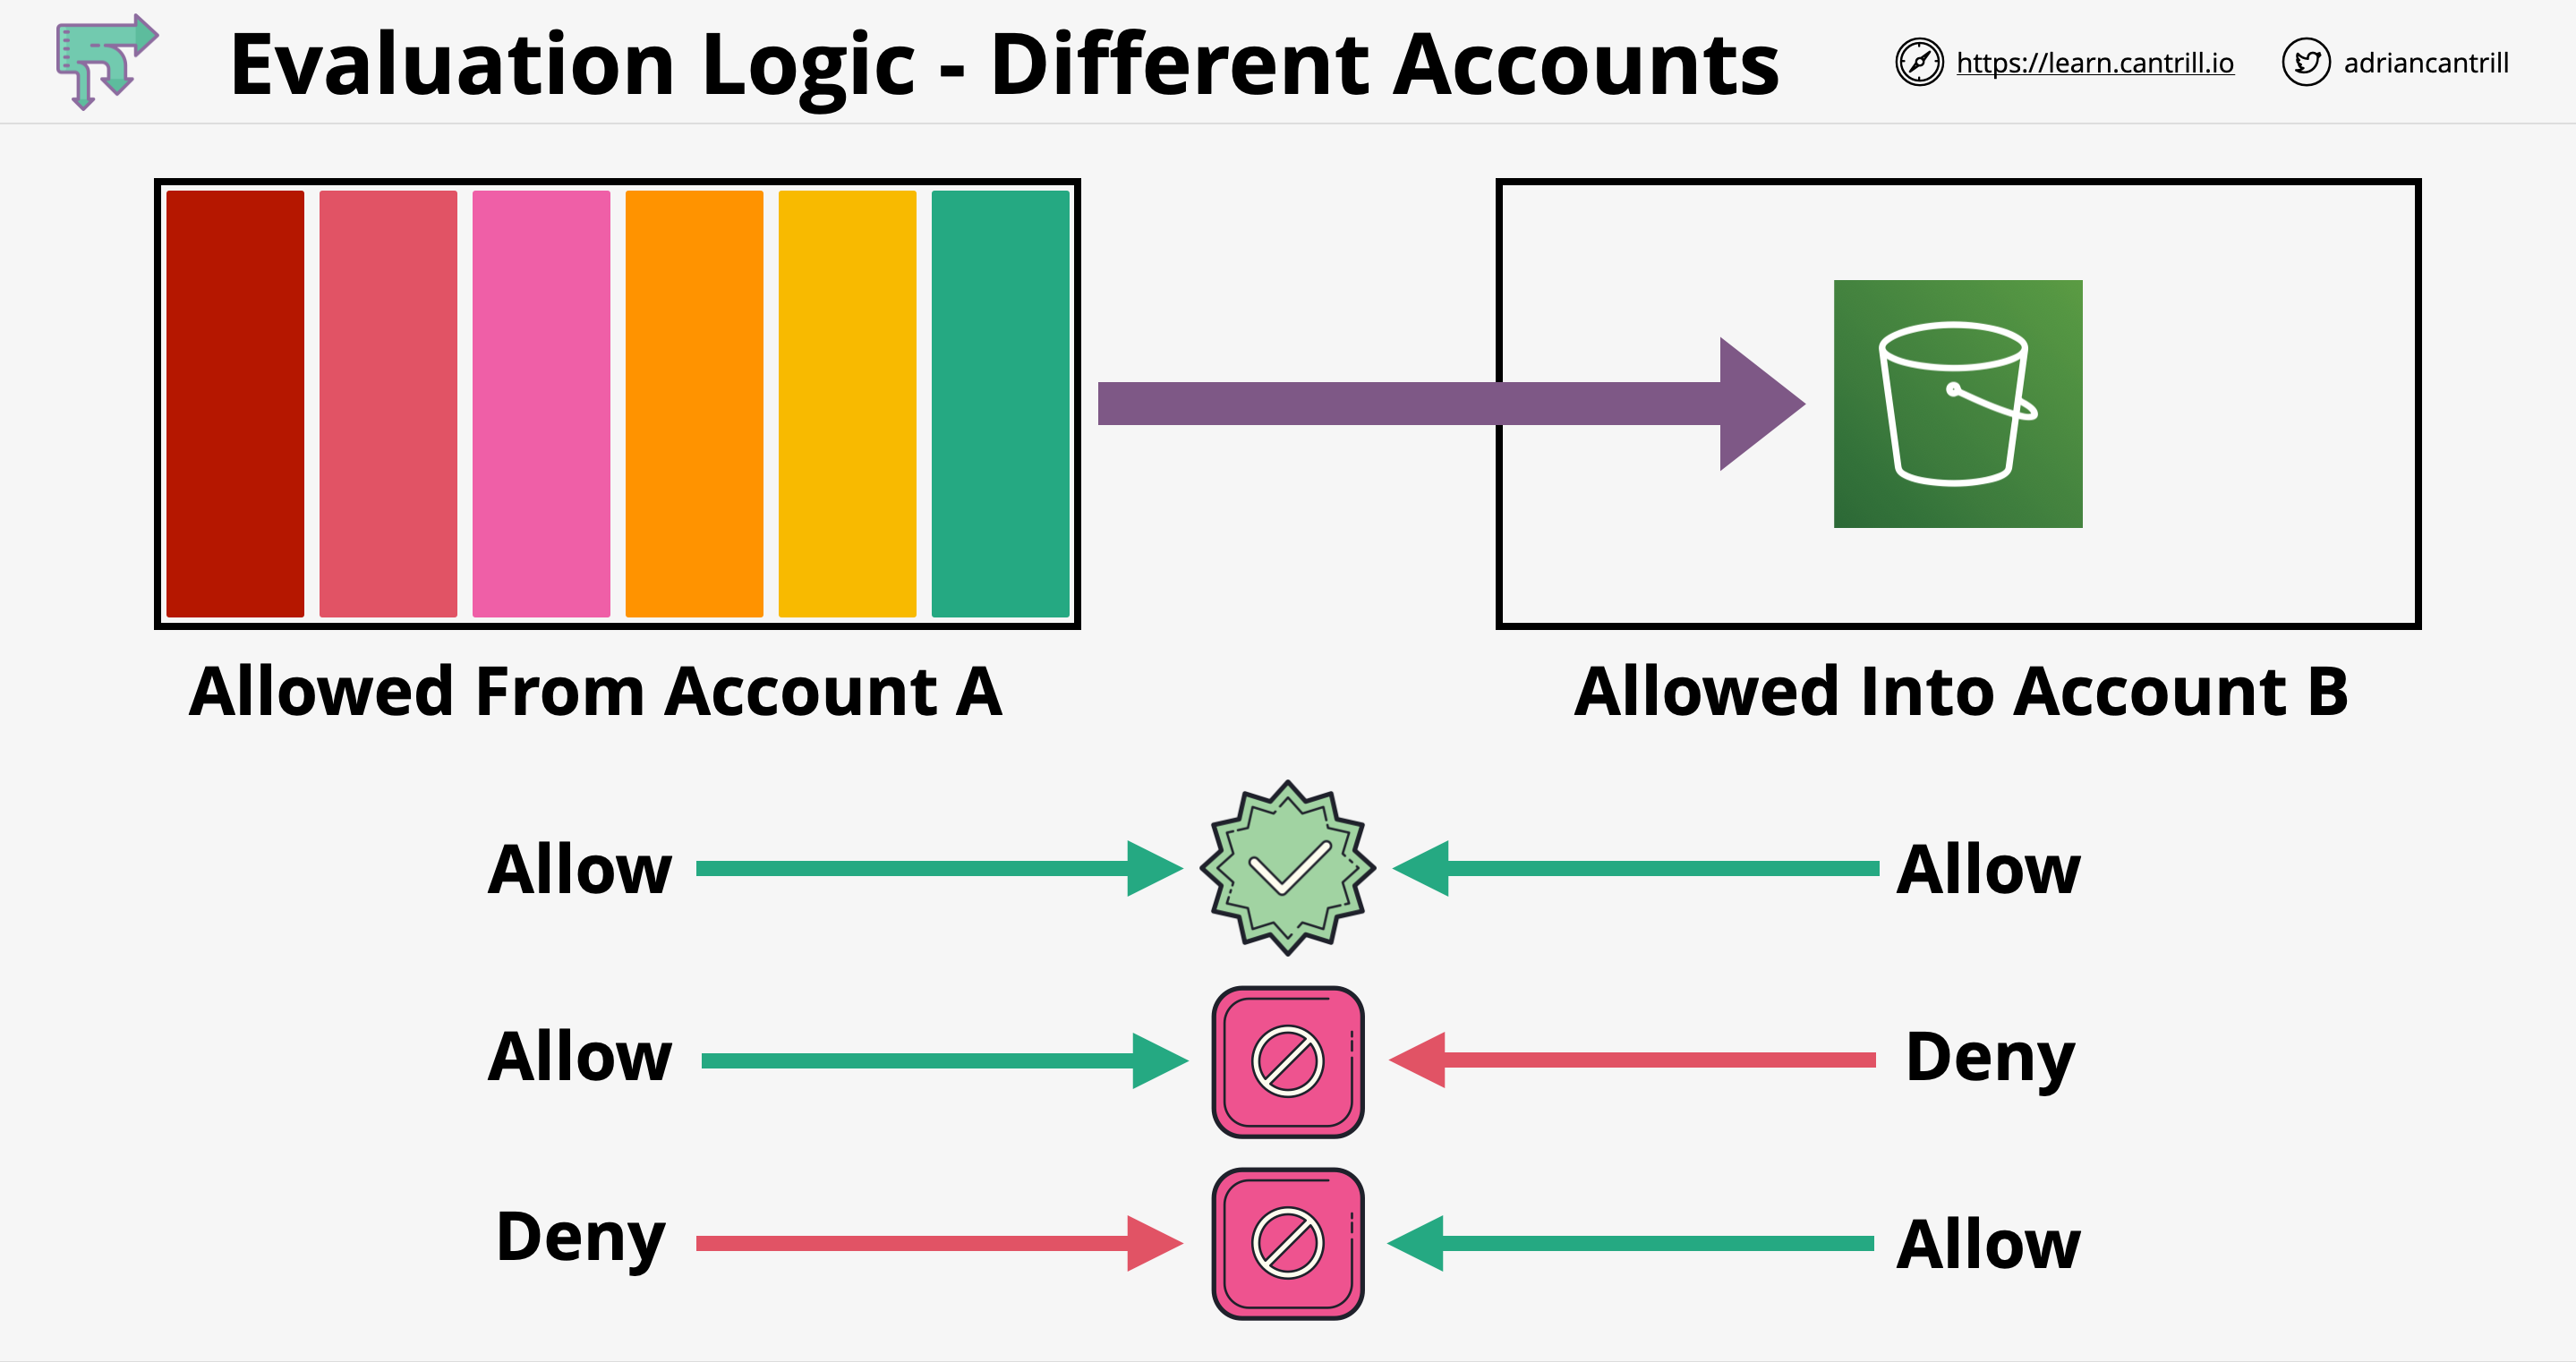 policy evaluation logic - different account